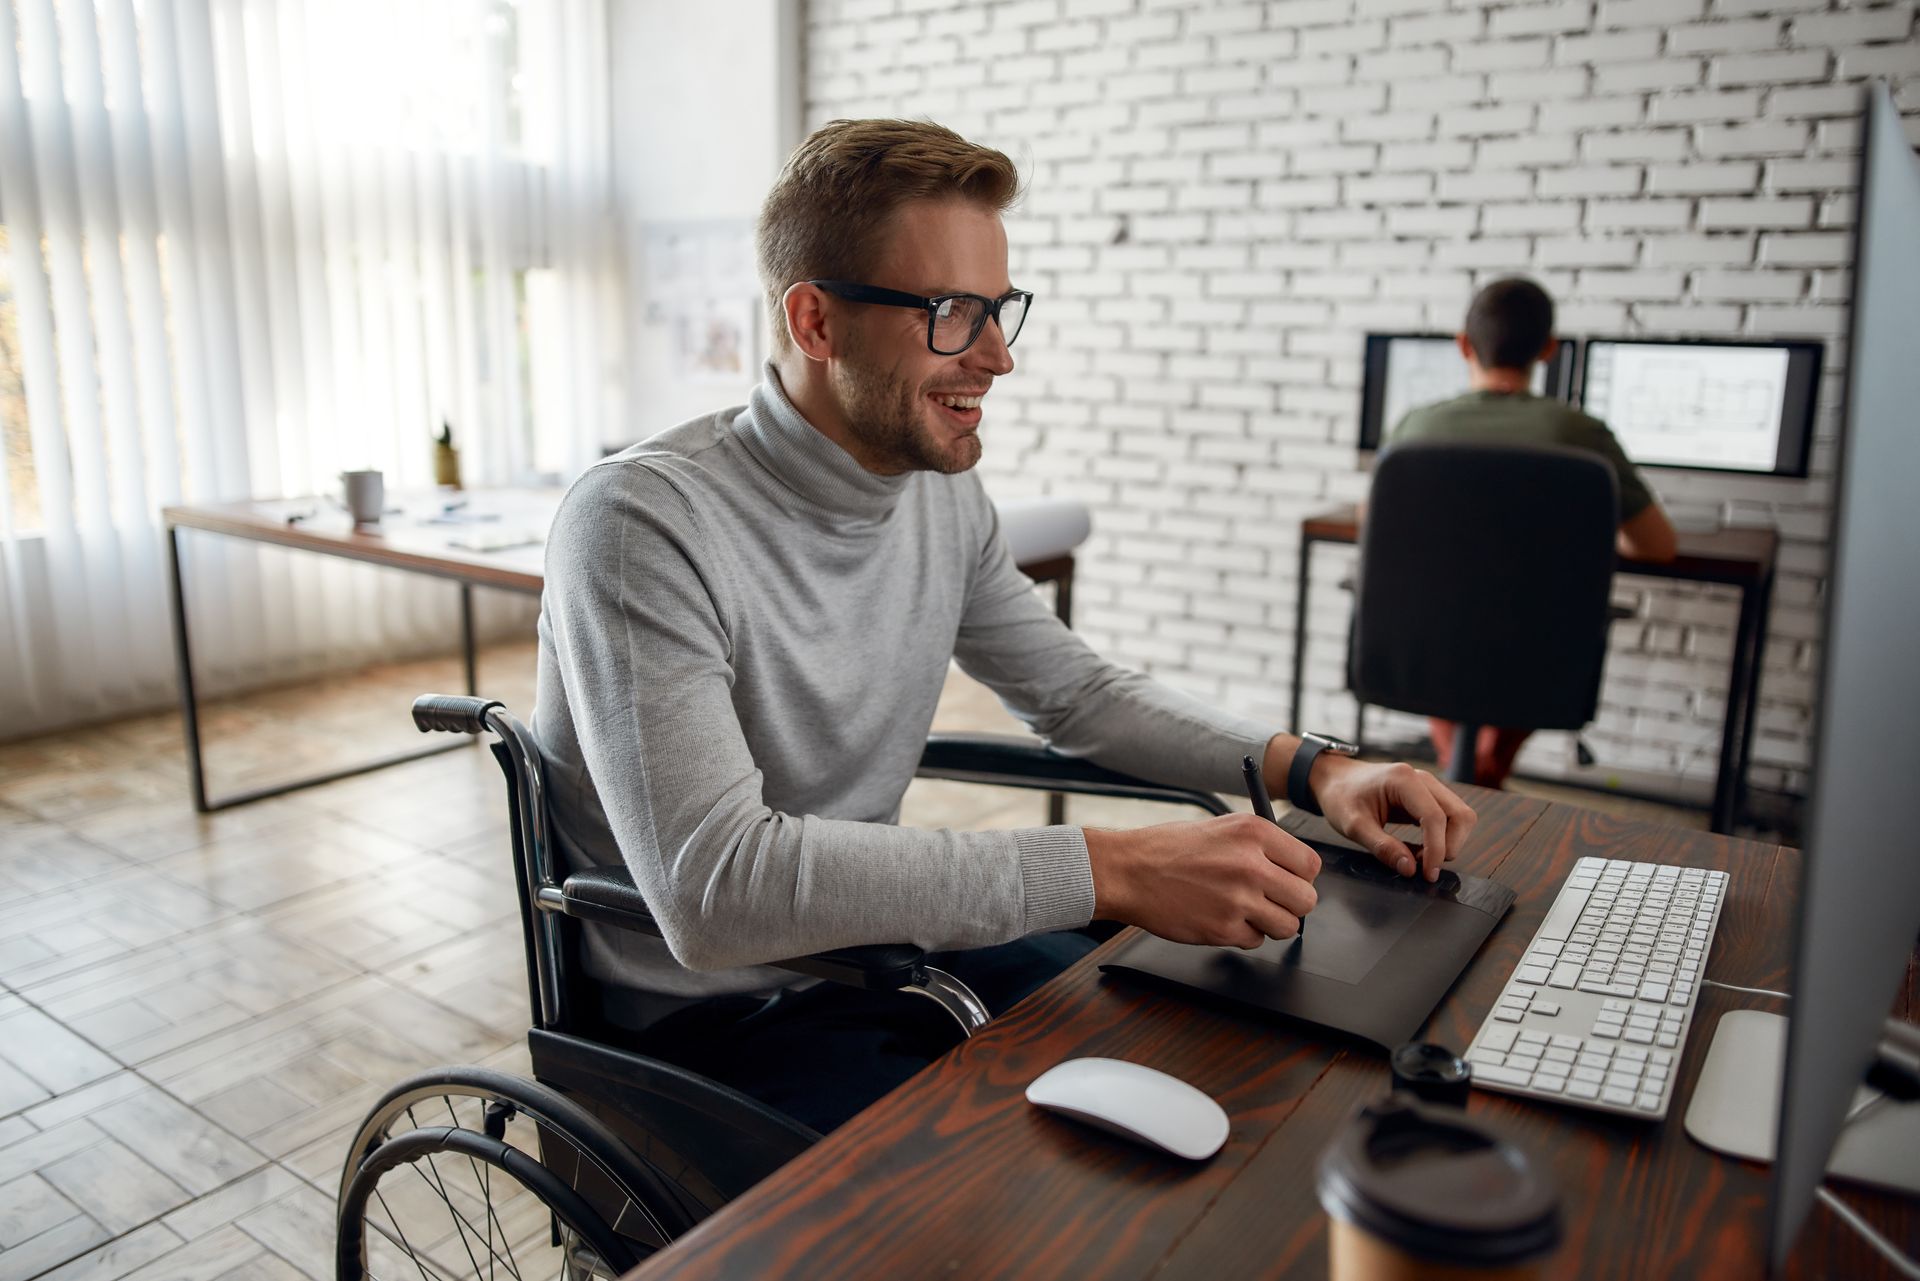 employing people with disability